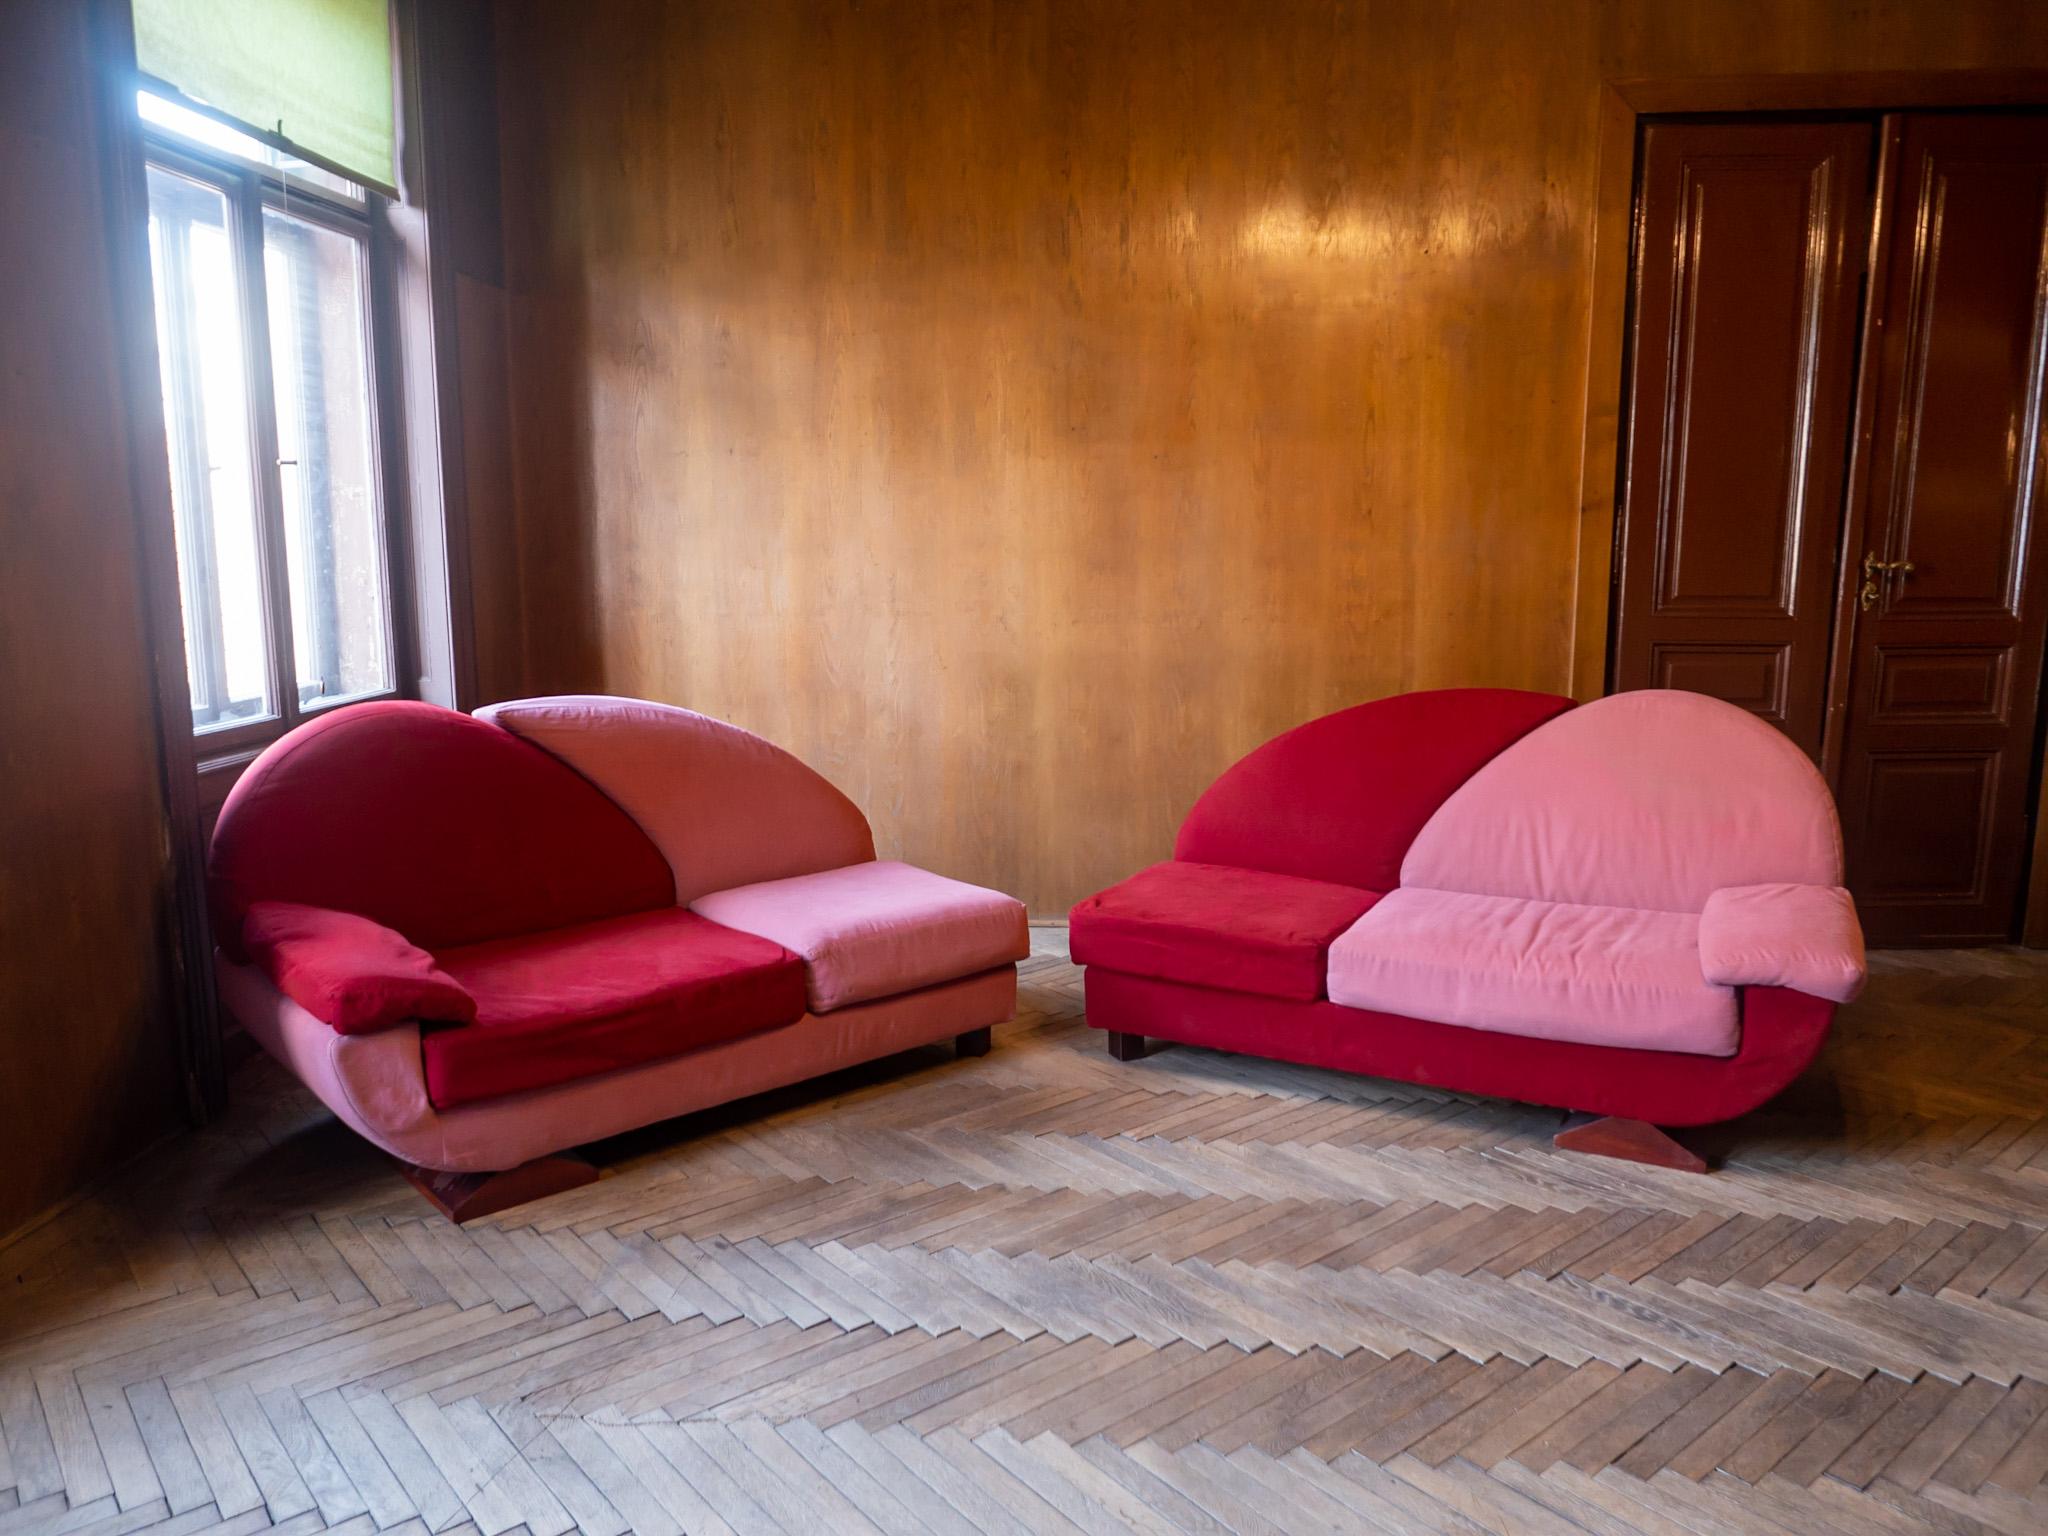 Post-Modern Pink and Red Alcantara Sofas, Italy, 1980s For Sale 6